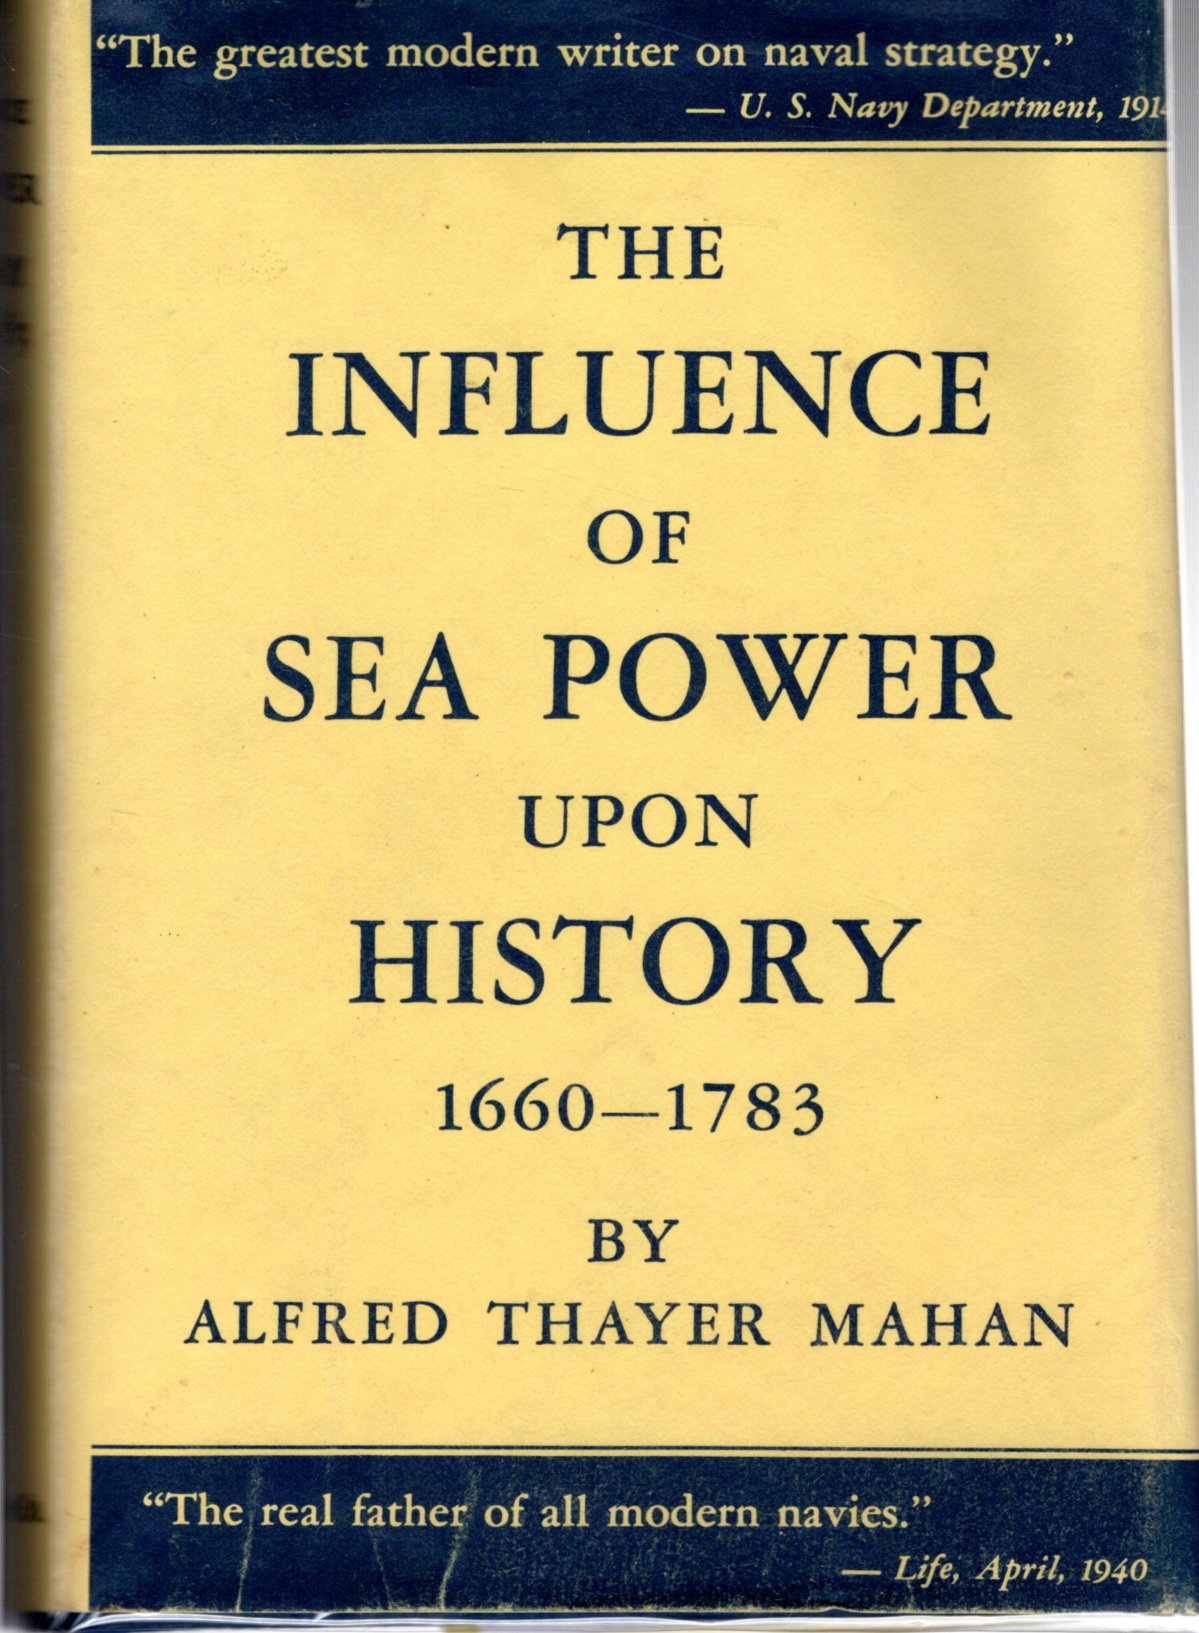 The Influence of Sea Power Upon History, 1660-1805 (First American Century Series) - Mahan, Alfred Thayer